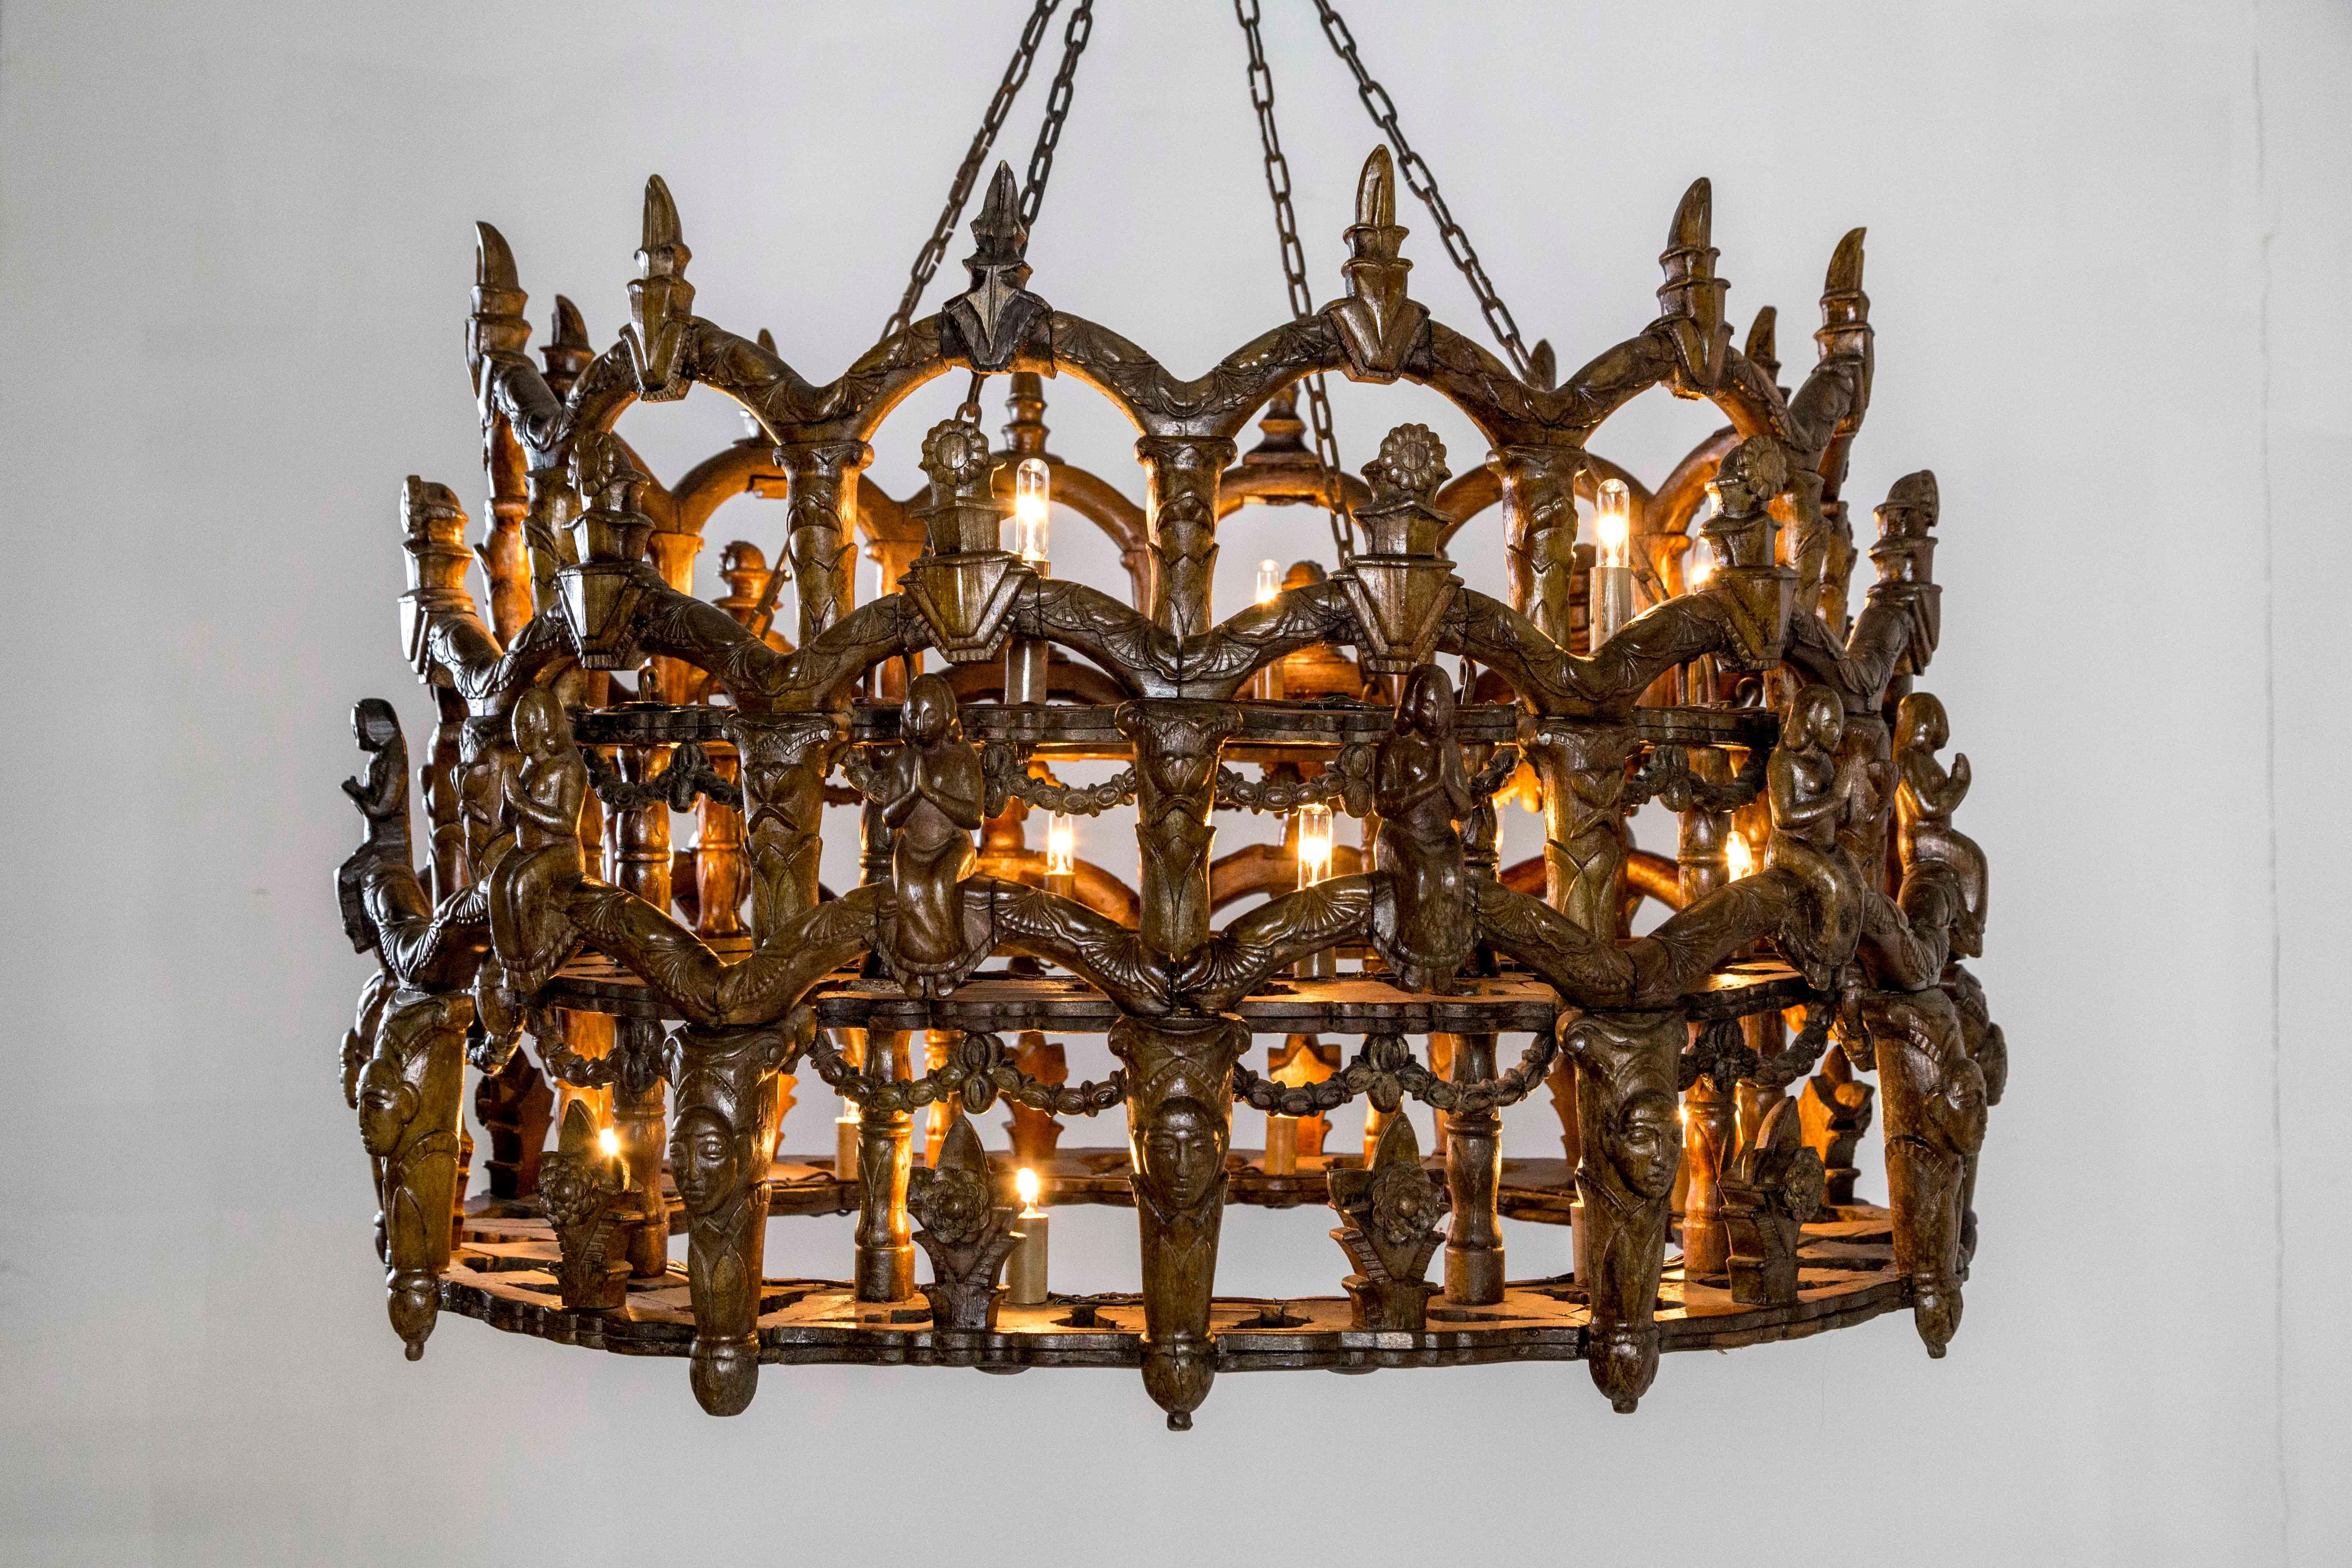 Spanish Colonial Carved Wooden S. American Folk Chandelier with Figures and Arches